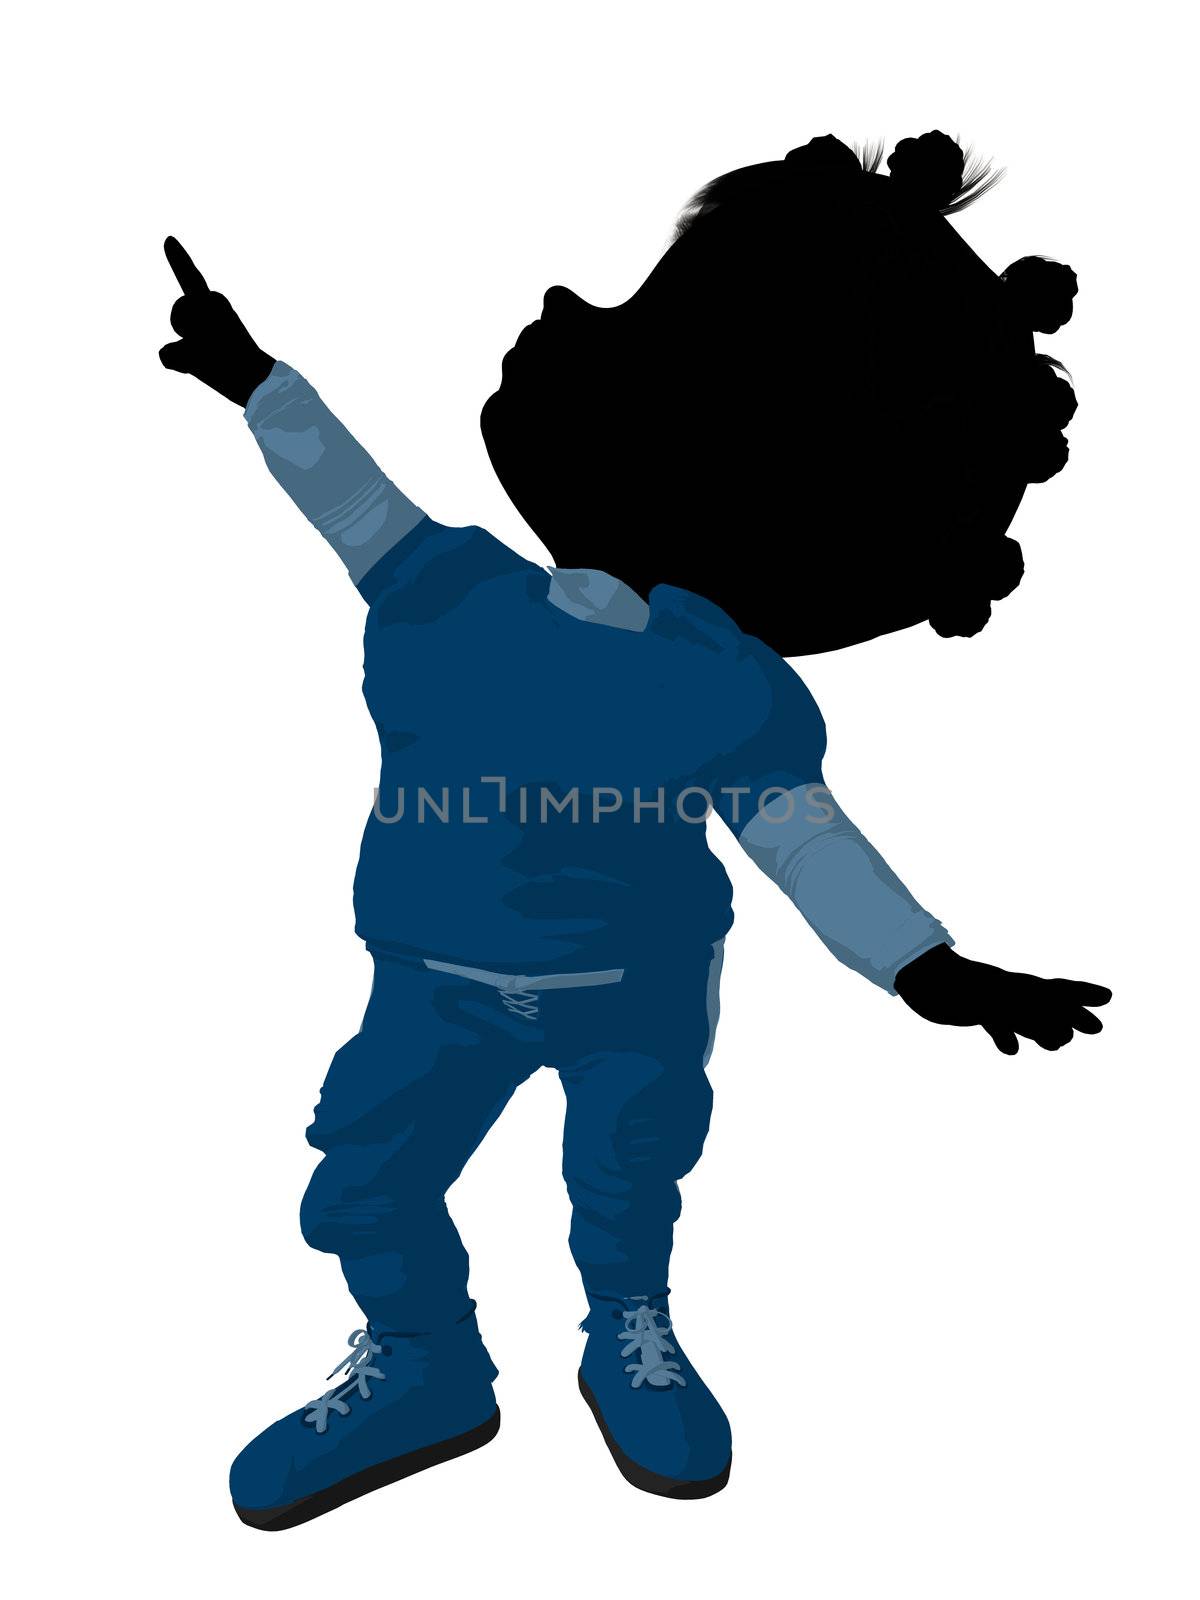 Little African American Football Girl Illustration Silhouette by kathygold